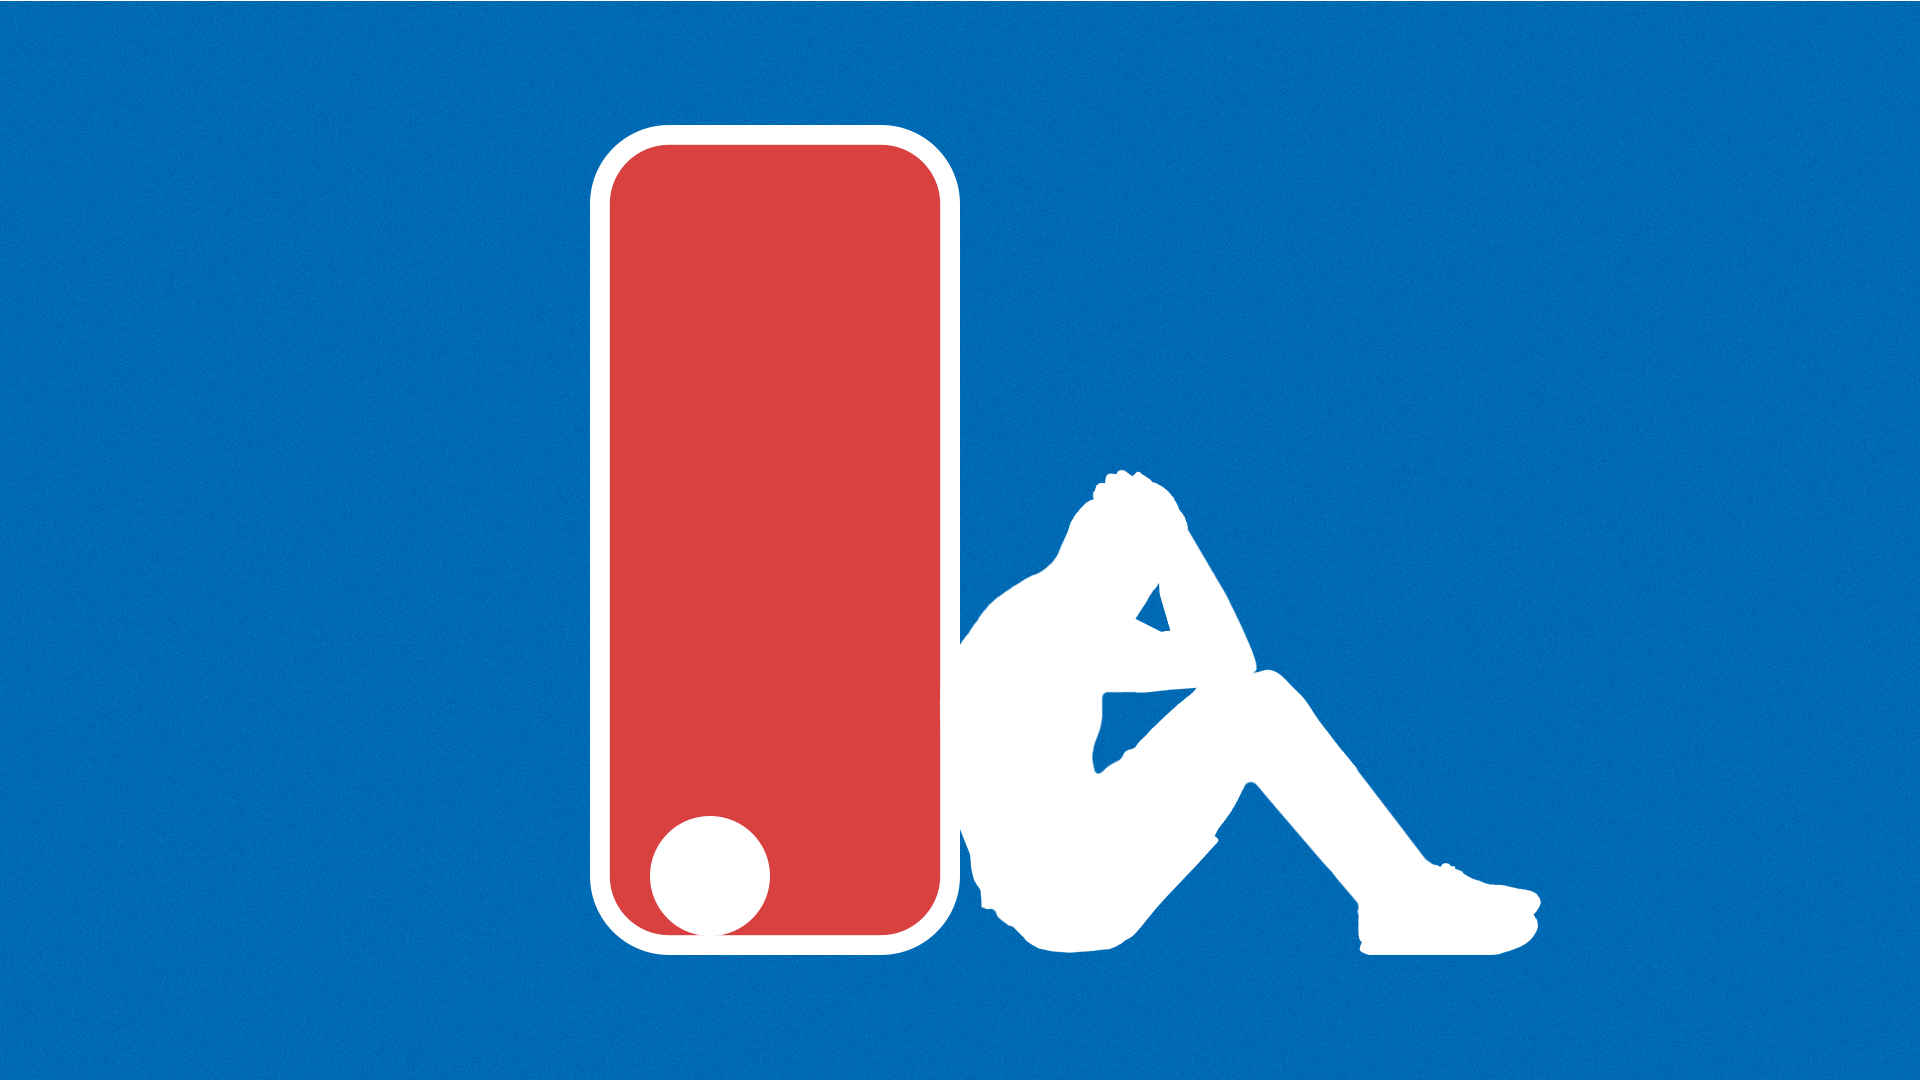 Illustration of the NBA logo with the ball left abandoned and the player sitting and leaning against the outside frame of the logo